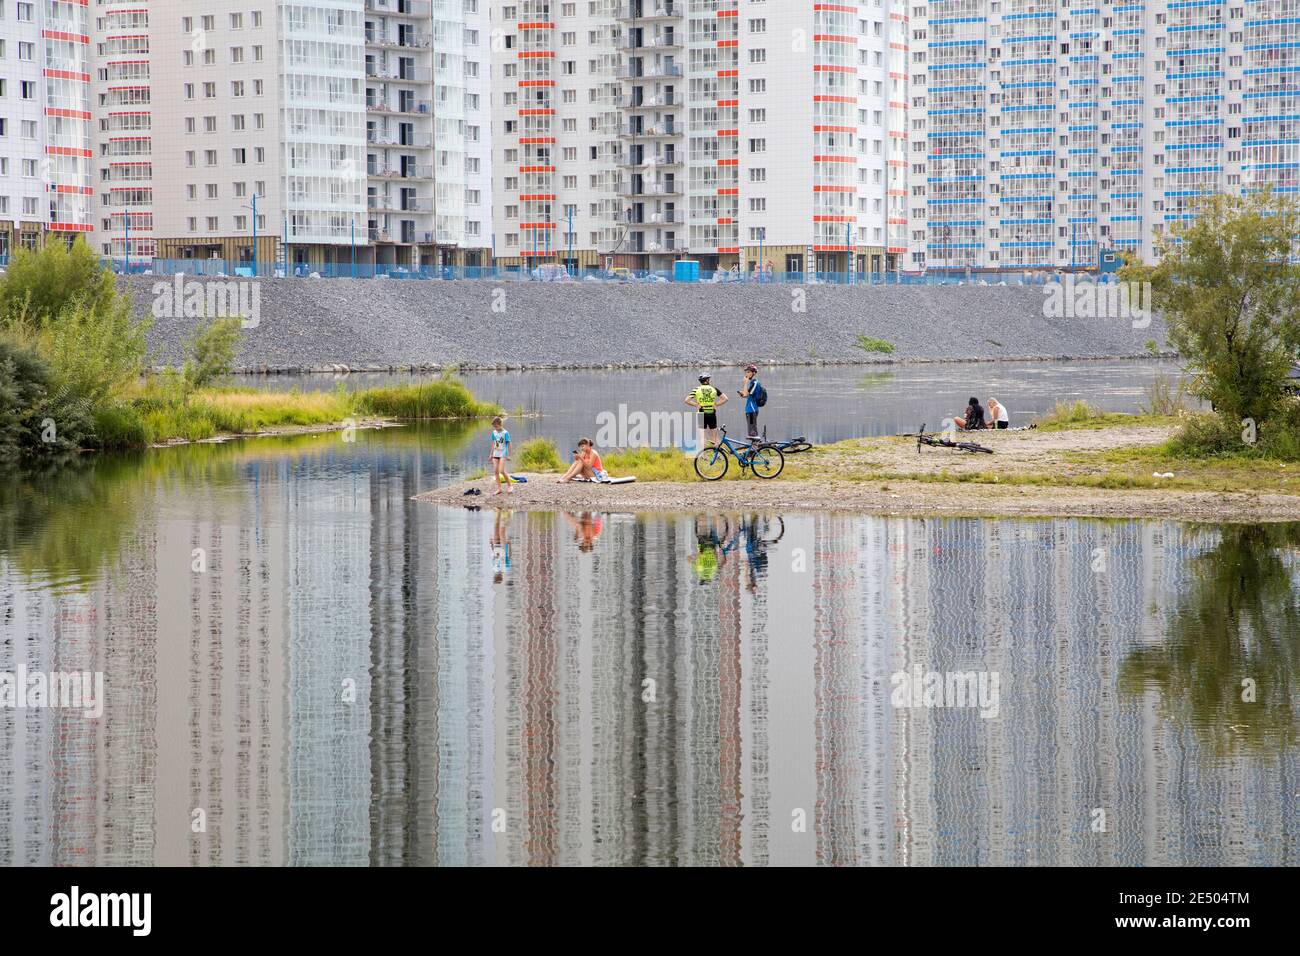 Local Russians relaxing on riverbank of the Yenisei River and newly built flats / apartments in suburb of city Krasnojarsk, Krasnoyarsk Krai, Russia Stock Photo